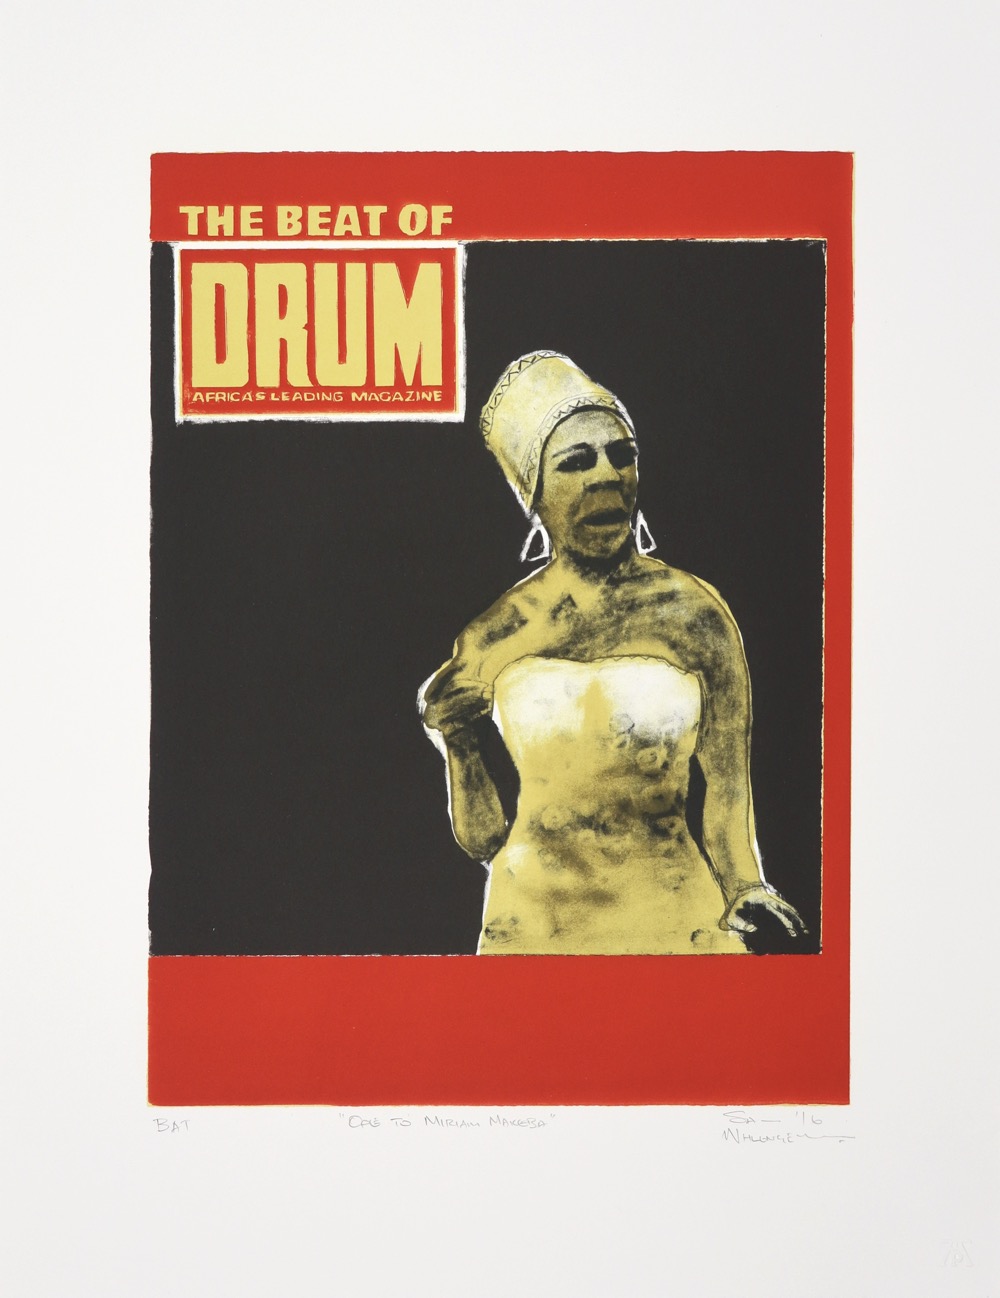 Lithograph of Drum Magazine cover with drawing of singer Miriam Makeba on it.